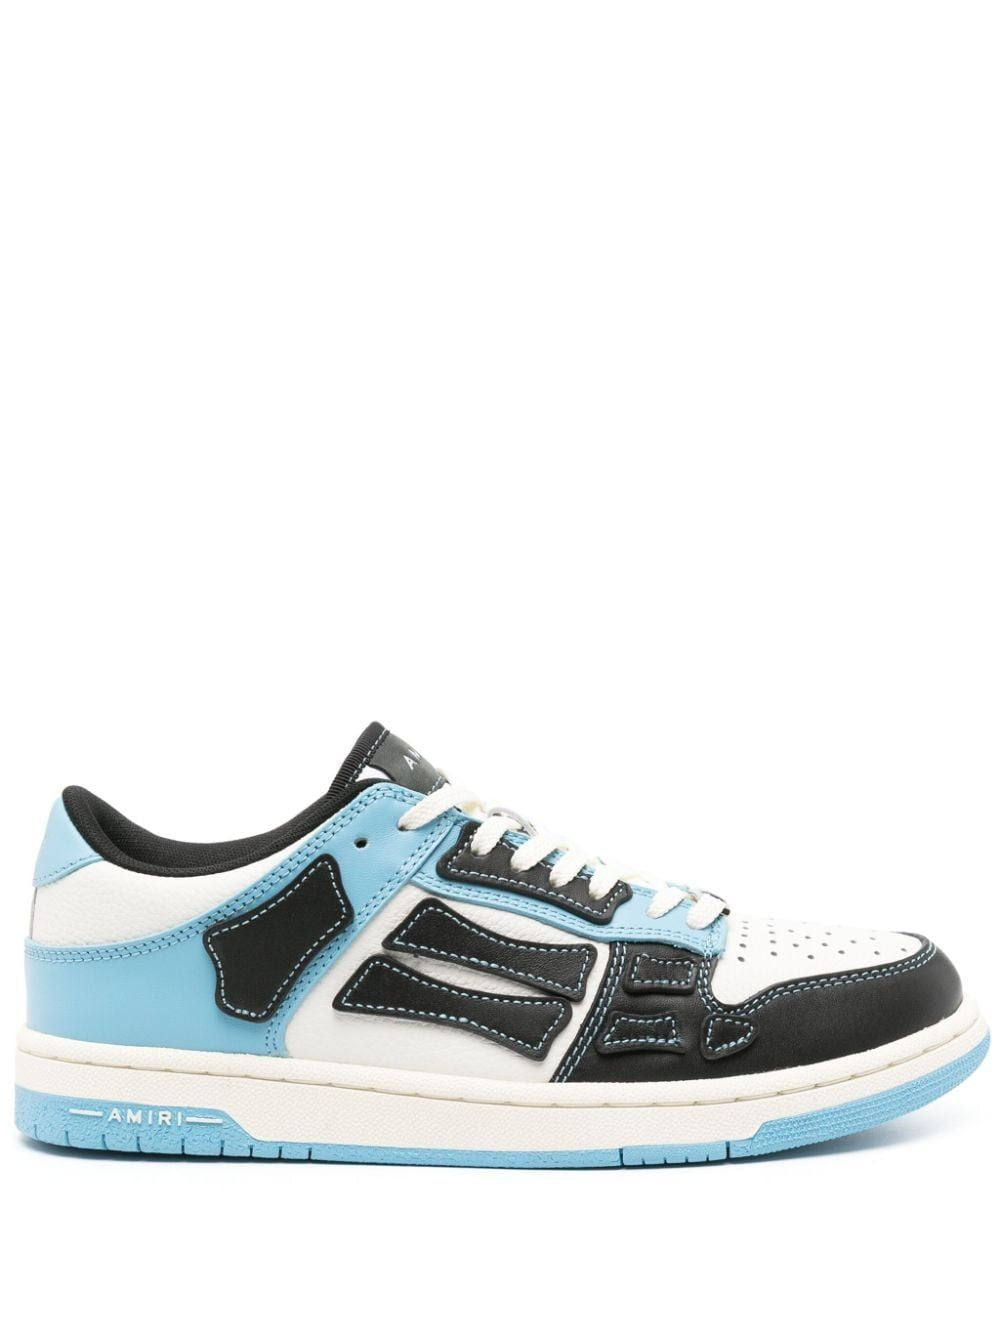 AMIRI Blue Low Top Sneakers for Men - SS24 Collection